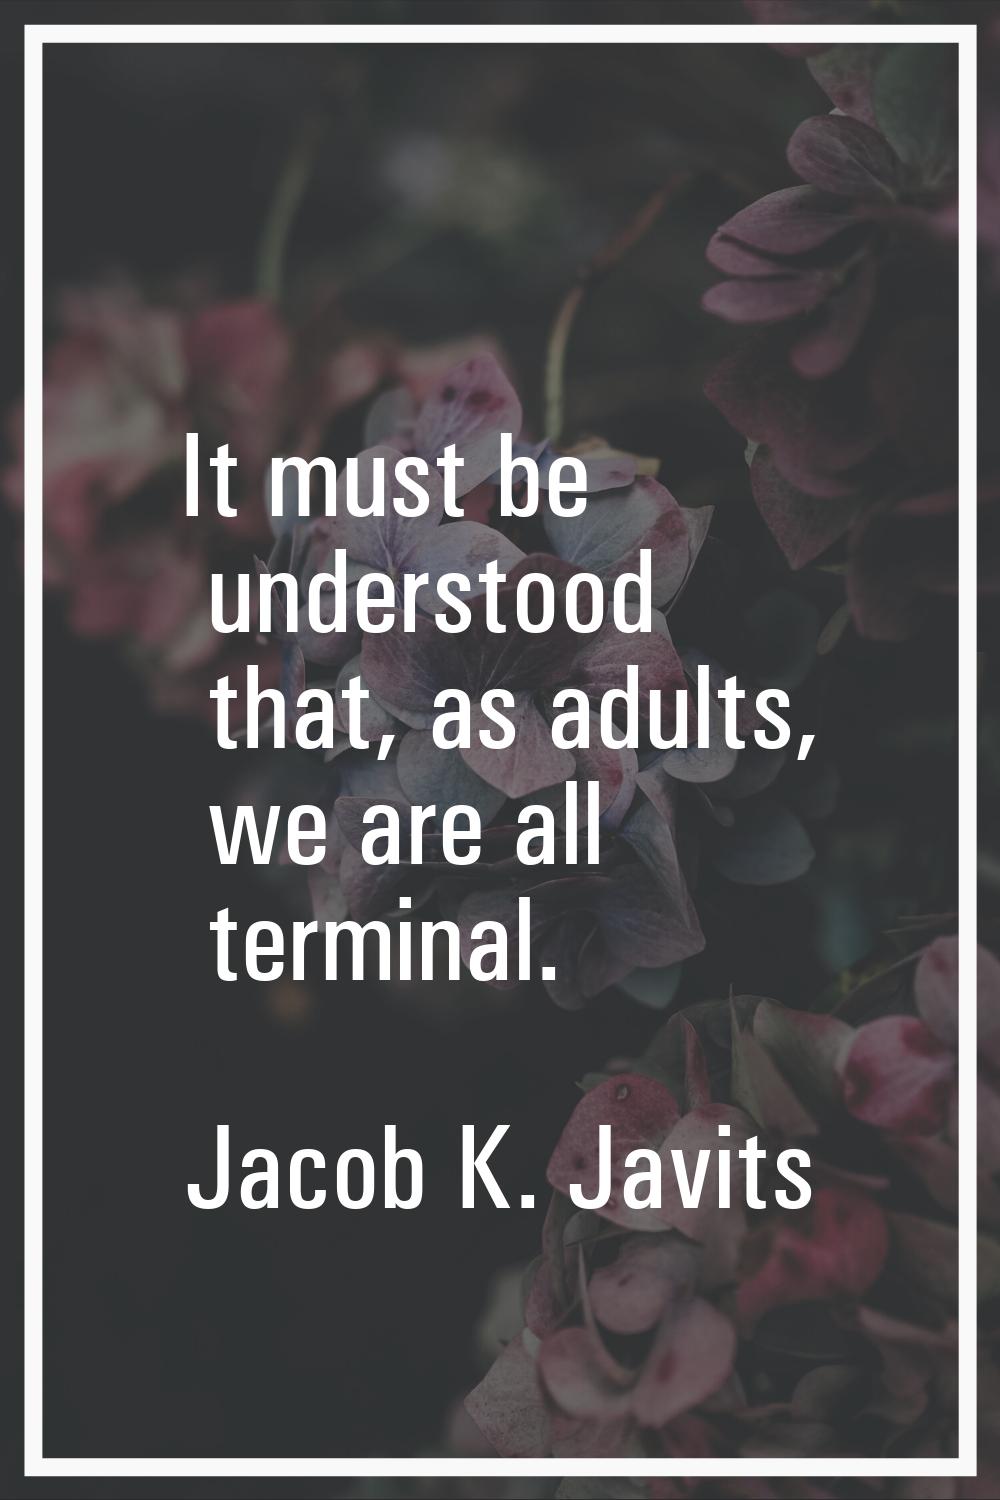 It must be understood that, as adults, we are all terminal.